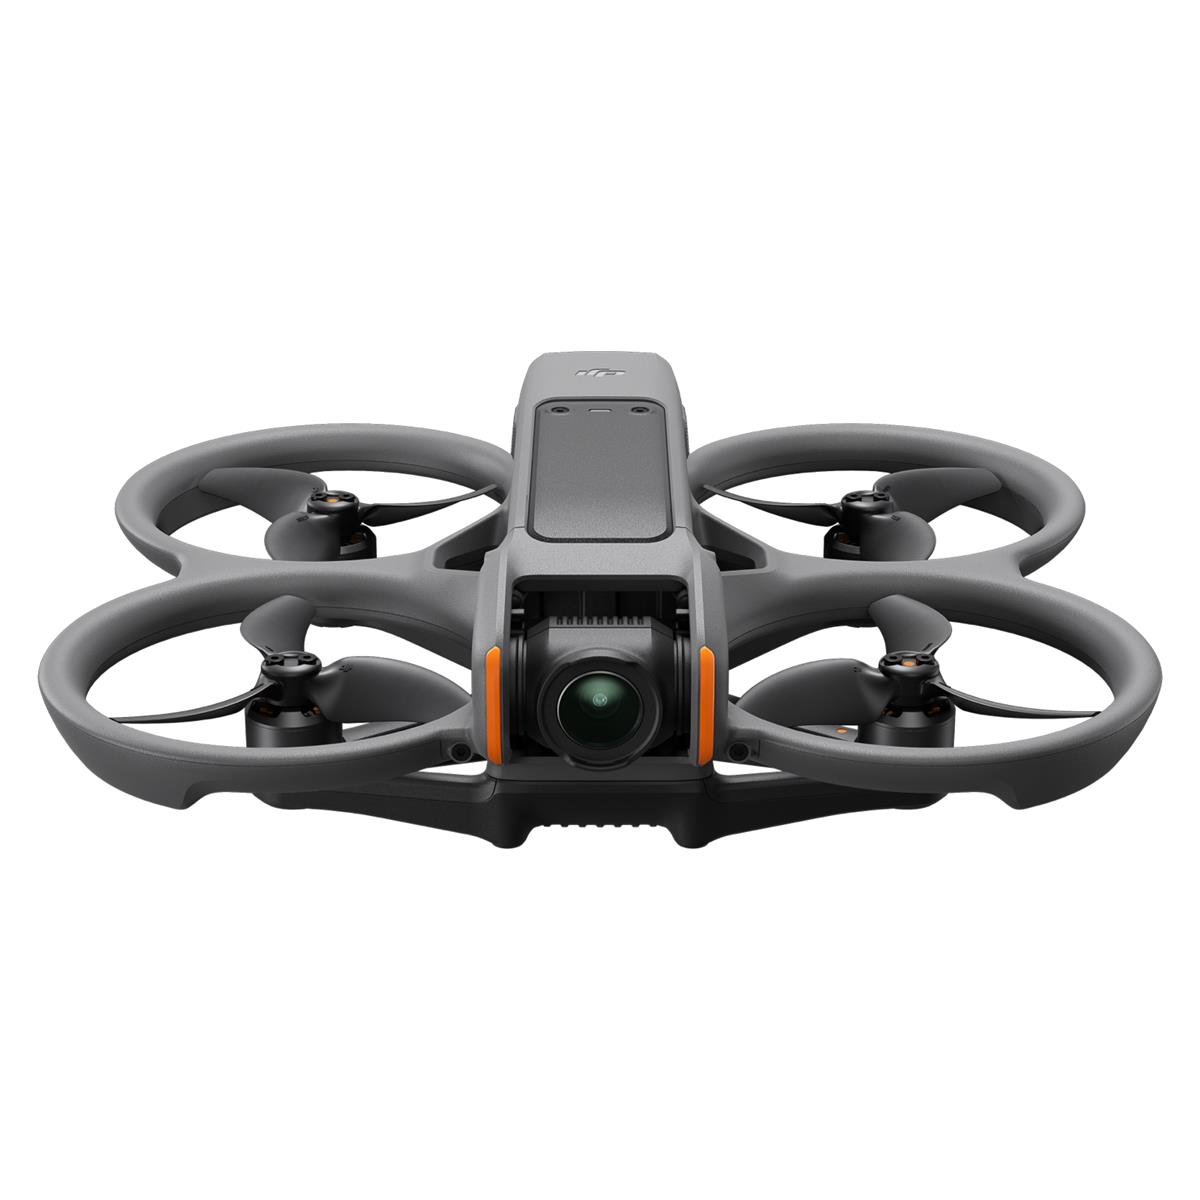 Image of DJI Avata 2 FPV Drone (Drone Only)